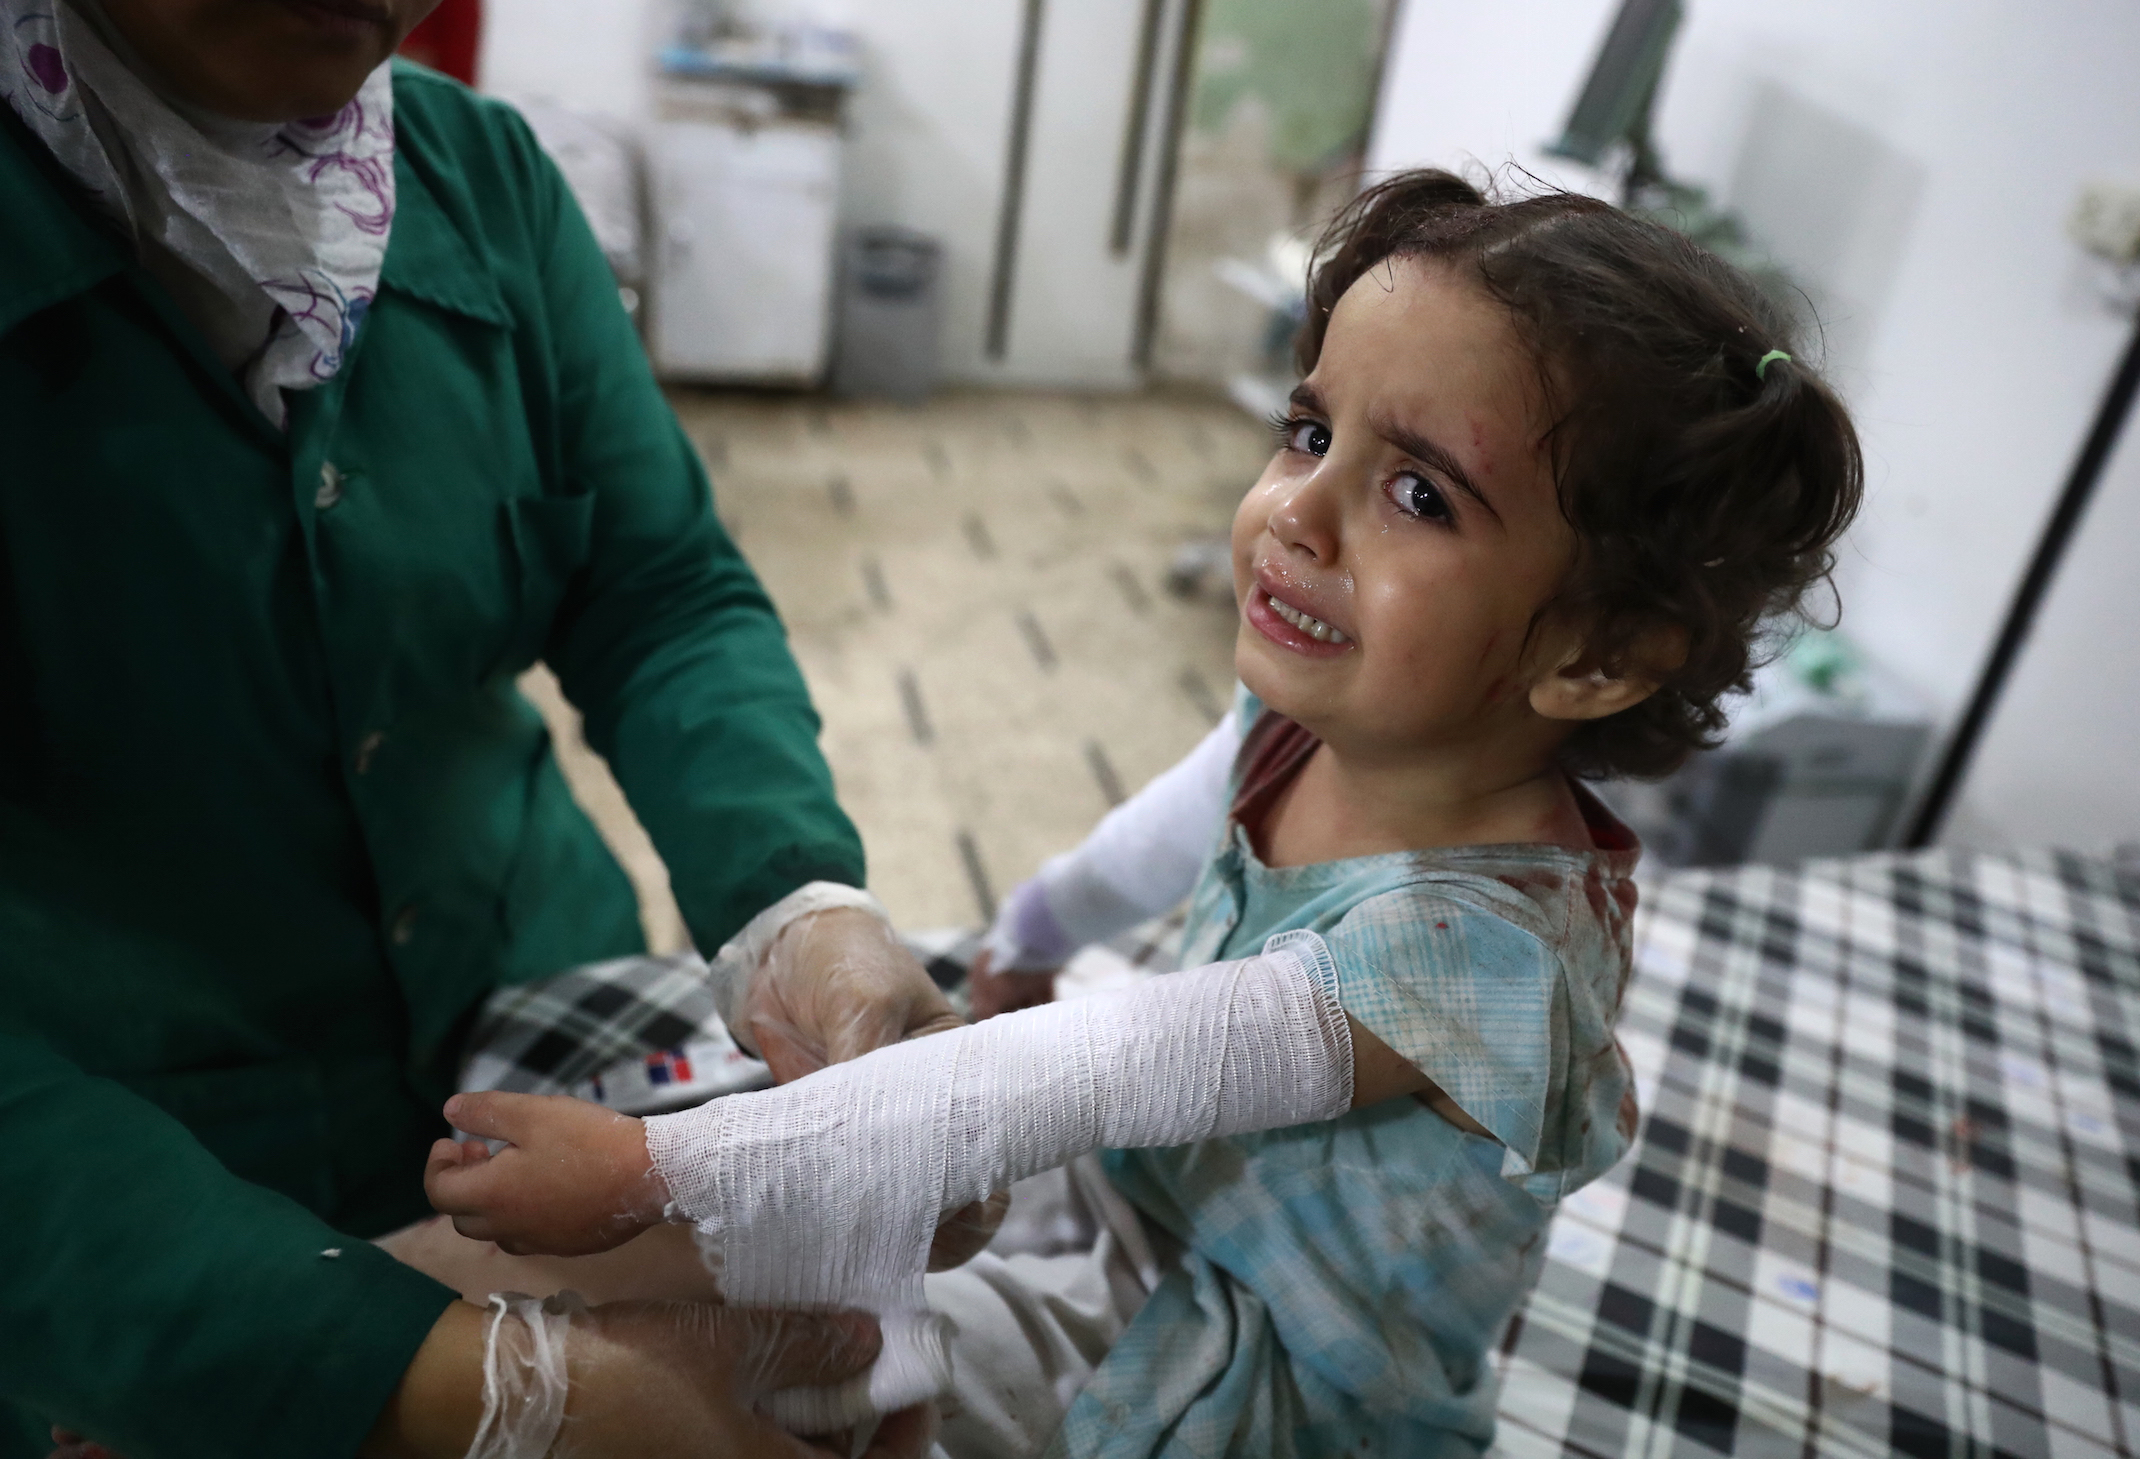 EDITORS NOTE: Graphic content / A Syria girl cries as she receives treatment at a make-shift hospital in the rebel-held town of Douma, east of the Syrian capital Damascus, following reported cluster bomb shelling on October 20, 2016.   / AFP PHOTO / Abd Doumany